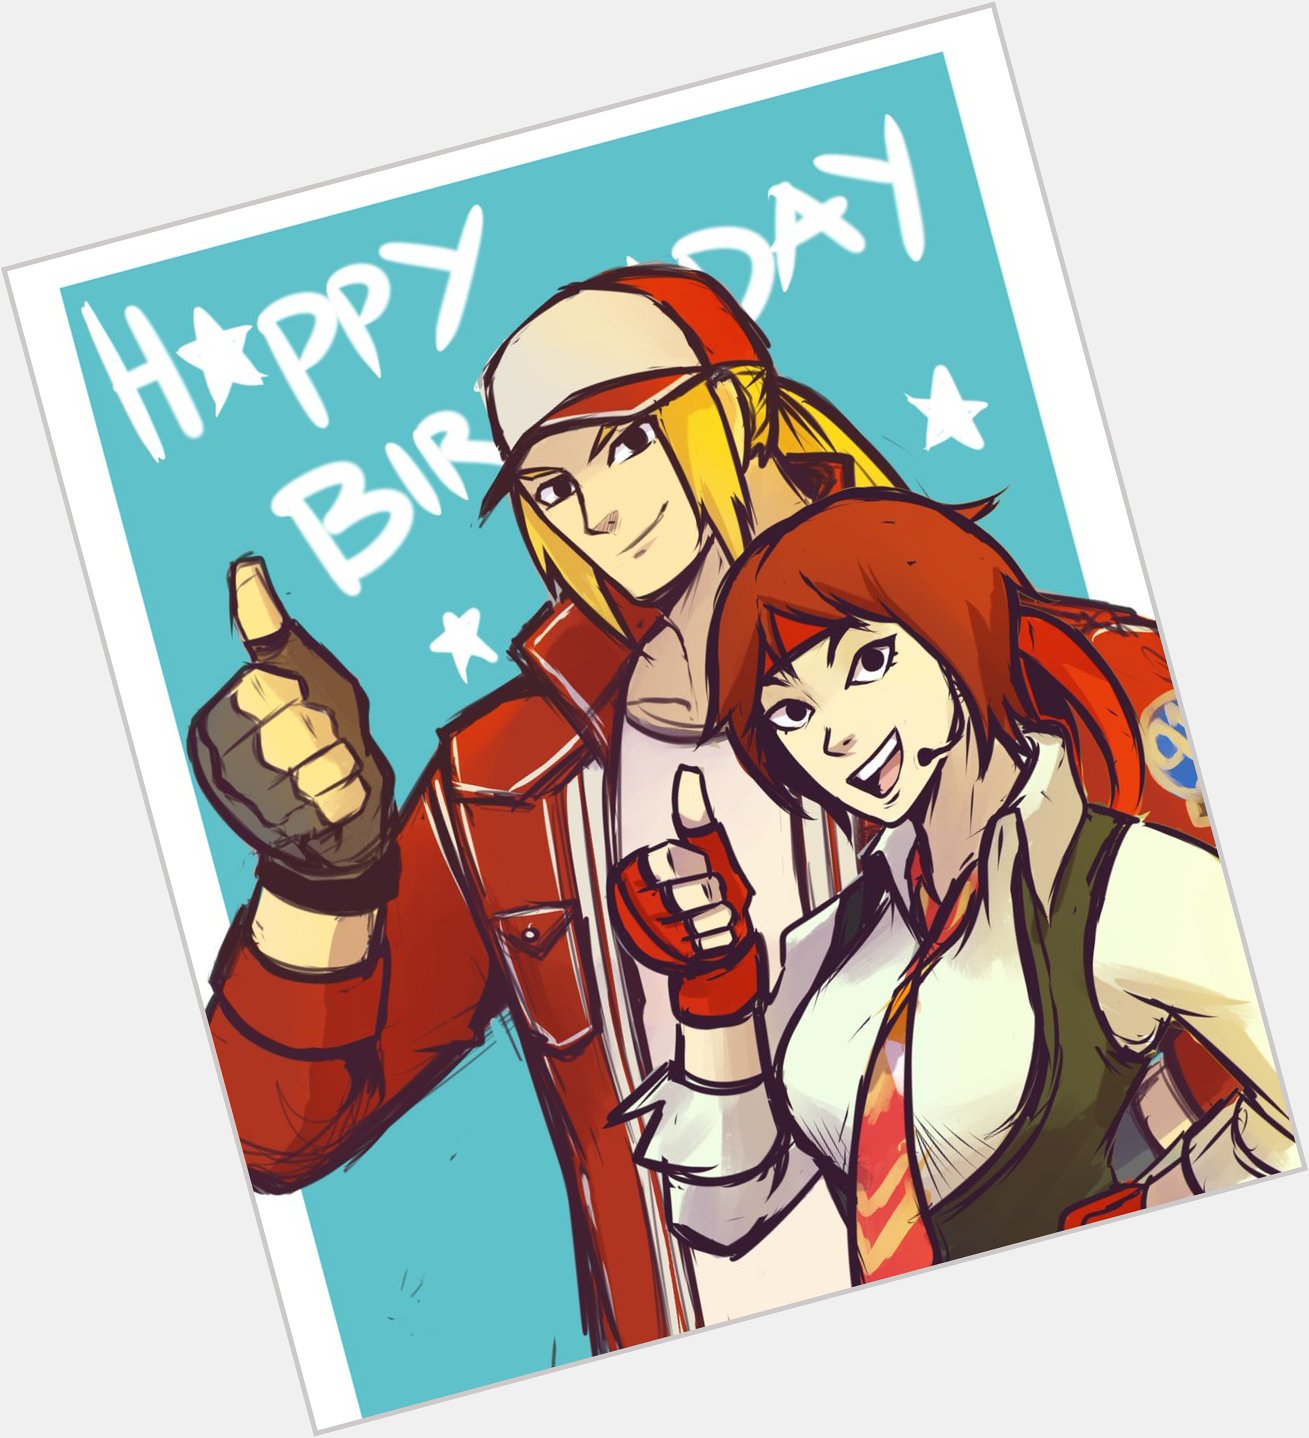 Missed it by a day (again)
Happy Birthday to Terry Bogard and Sakura Kasugano 